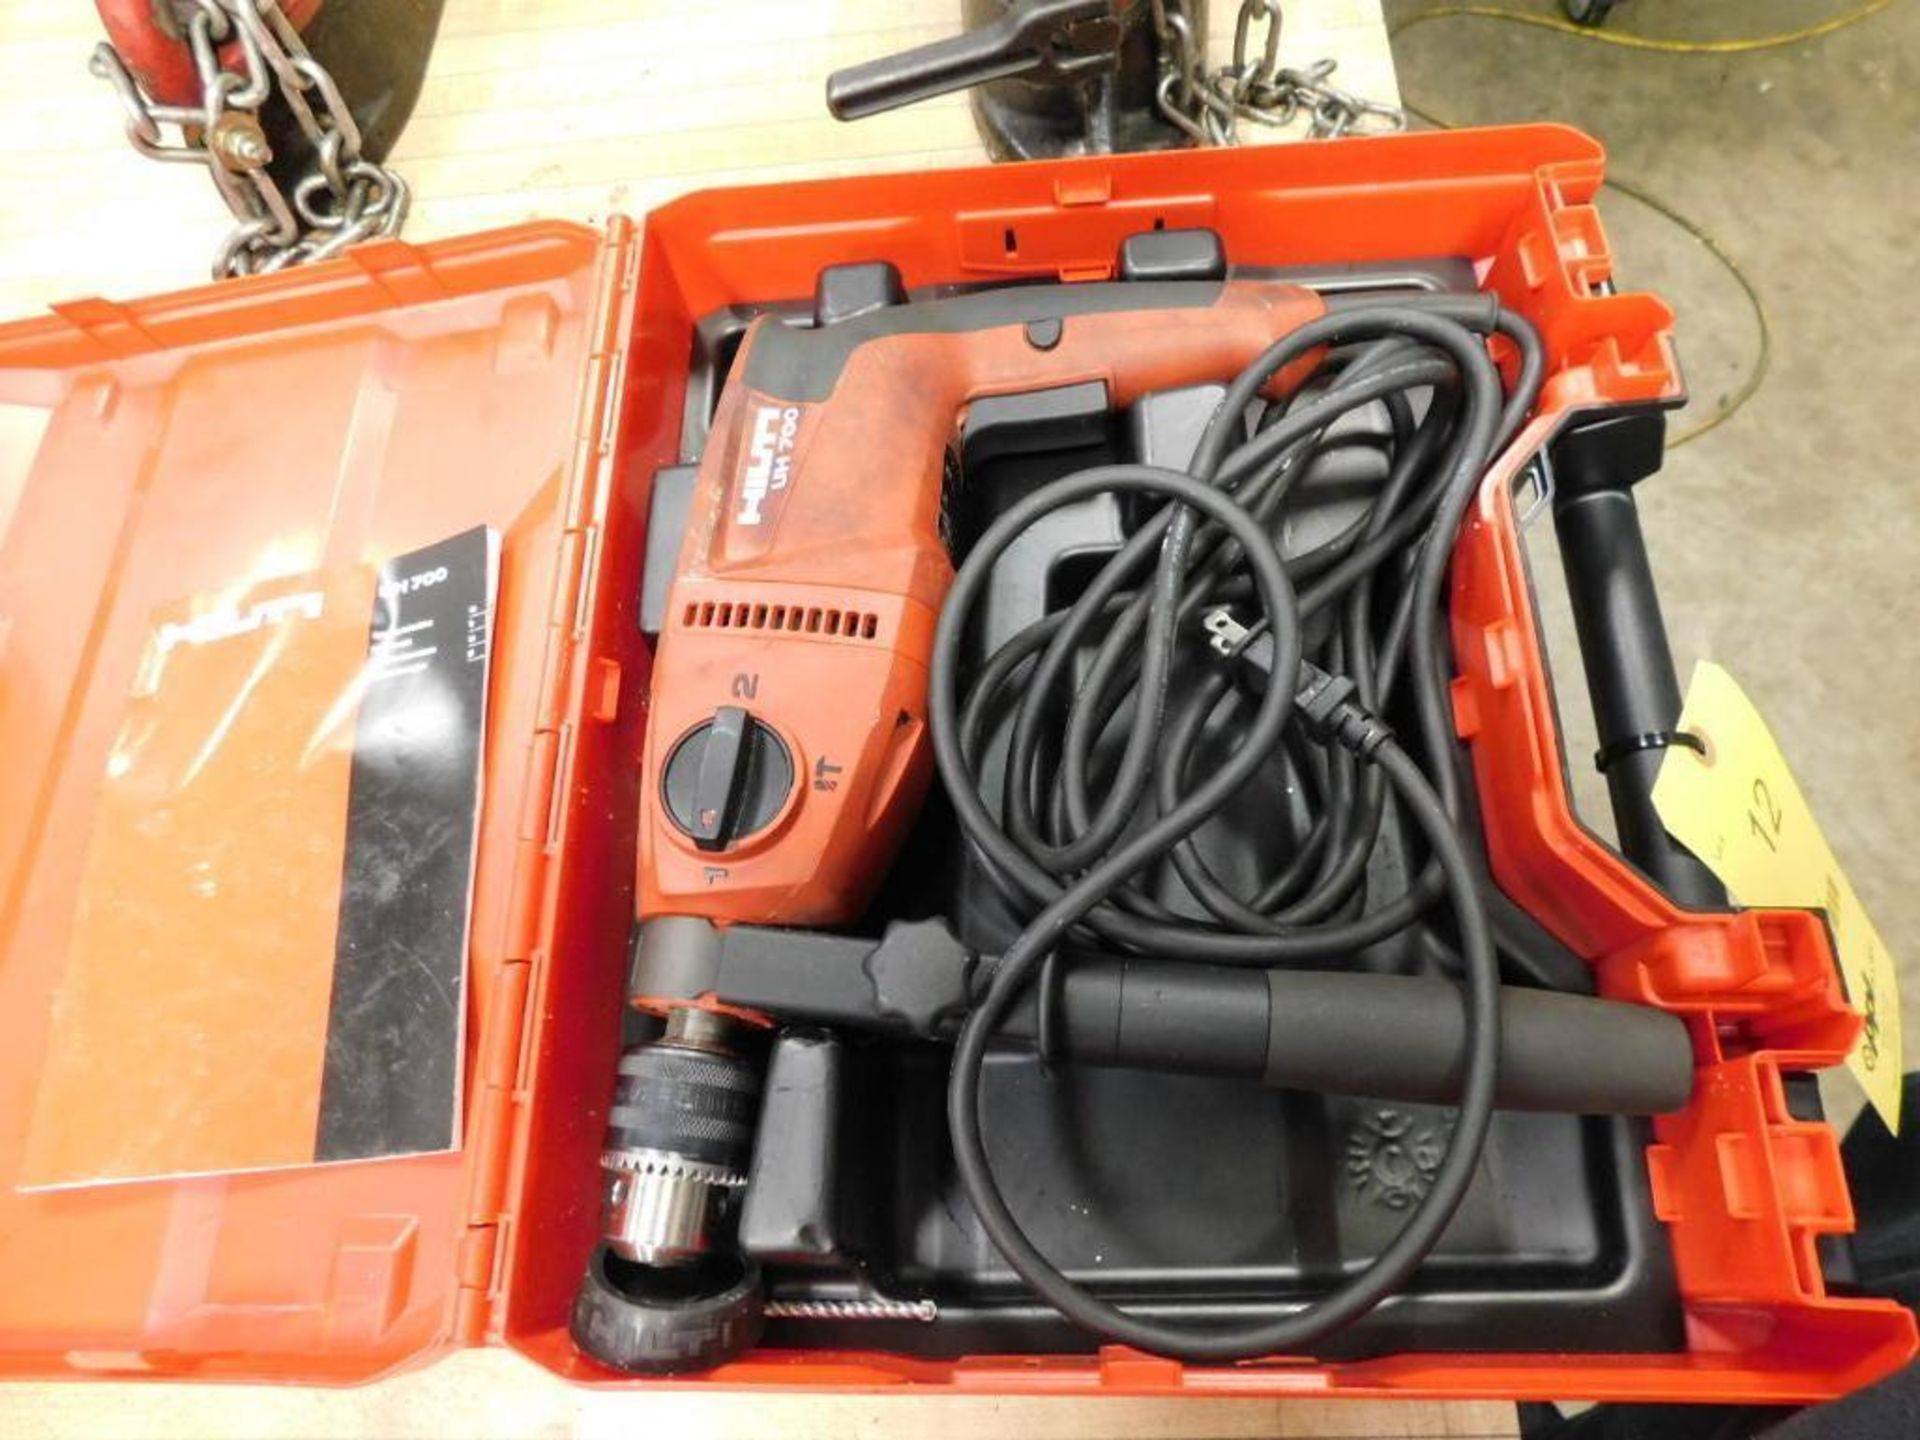 Hilti UH700 Rotary Hammer Drill in Case - Image 2 of 3